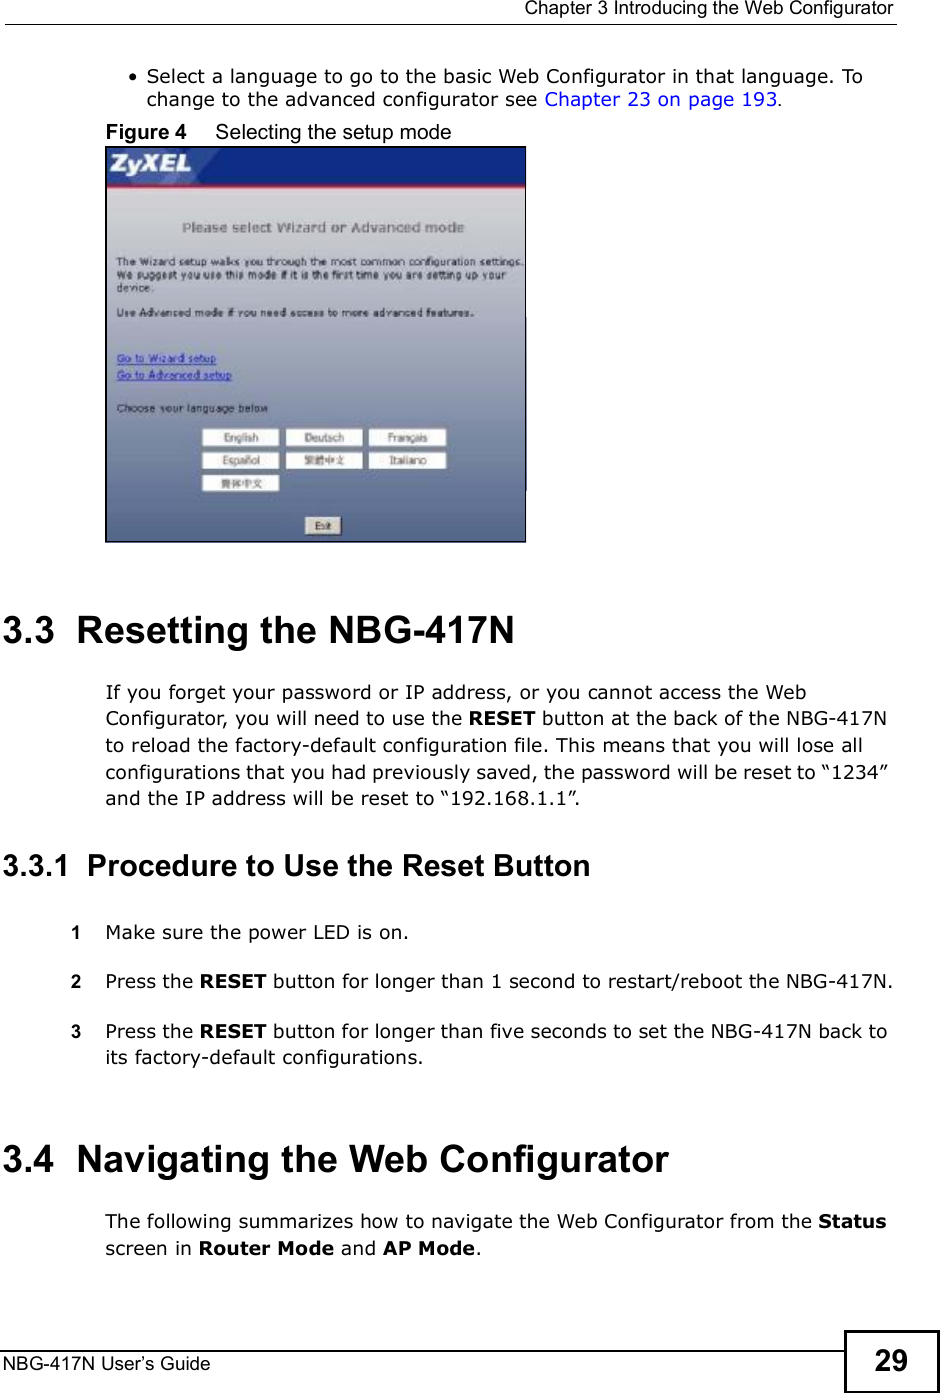  Chapter 3Introducing the Web ConfiguratorNBG-417N User s Guide 29 Select a language to go to the basic Web Configurator in that language. To change to the advanced configurator see Chapter 23 on page 193.Figure 4     Selecting the setup mode3.3  Resetting the NBG-417NIf you forget your password or IP address, or you cannot access the Web Configurator, you will need to use the RESET button at the back of the NBG-417N to reload the factory-default configuration file. This means that you will lose all configurations that you had previously saved, the password will be reset to &quot;1234# and the IP address will be reset to &quot;192.168.1.1#.3.3.1  Procedure to Use the Reset Button1Make sure the power LED is on.2Press the RESET button for longer than 1 second to restart/reboot the NBG-417N.3Press the RESET button for longer than five seconds to set the NBG-417N back to its factory-default configurations.3.4  Navigating the Web Configurator    The following summarizes how to navigate the Web Configurator from the Status screen in Router Mode and AP Mode. 